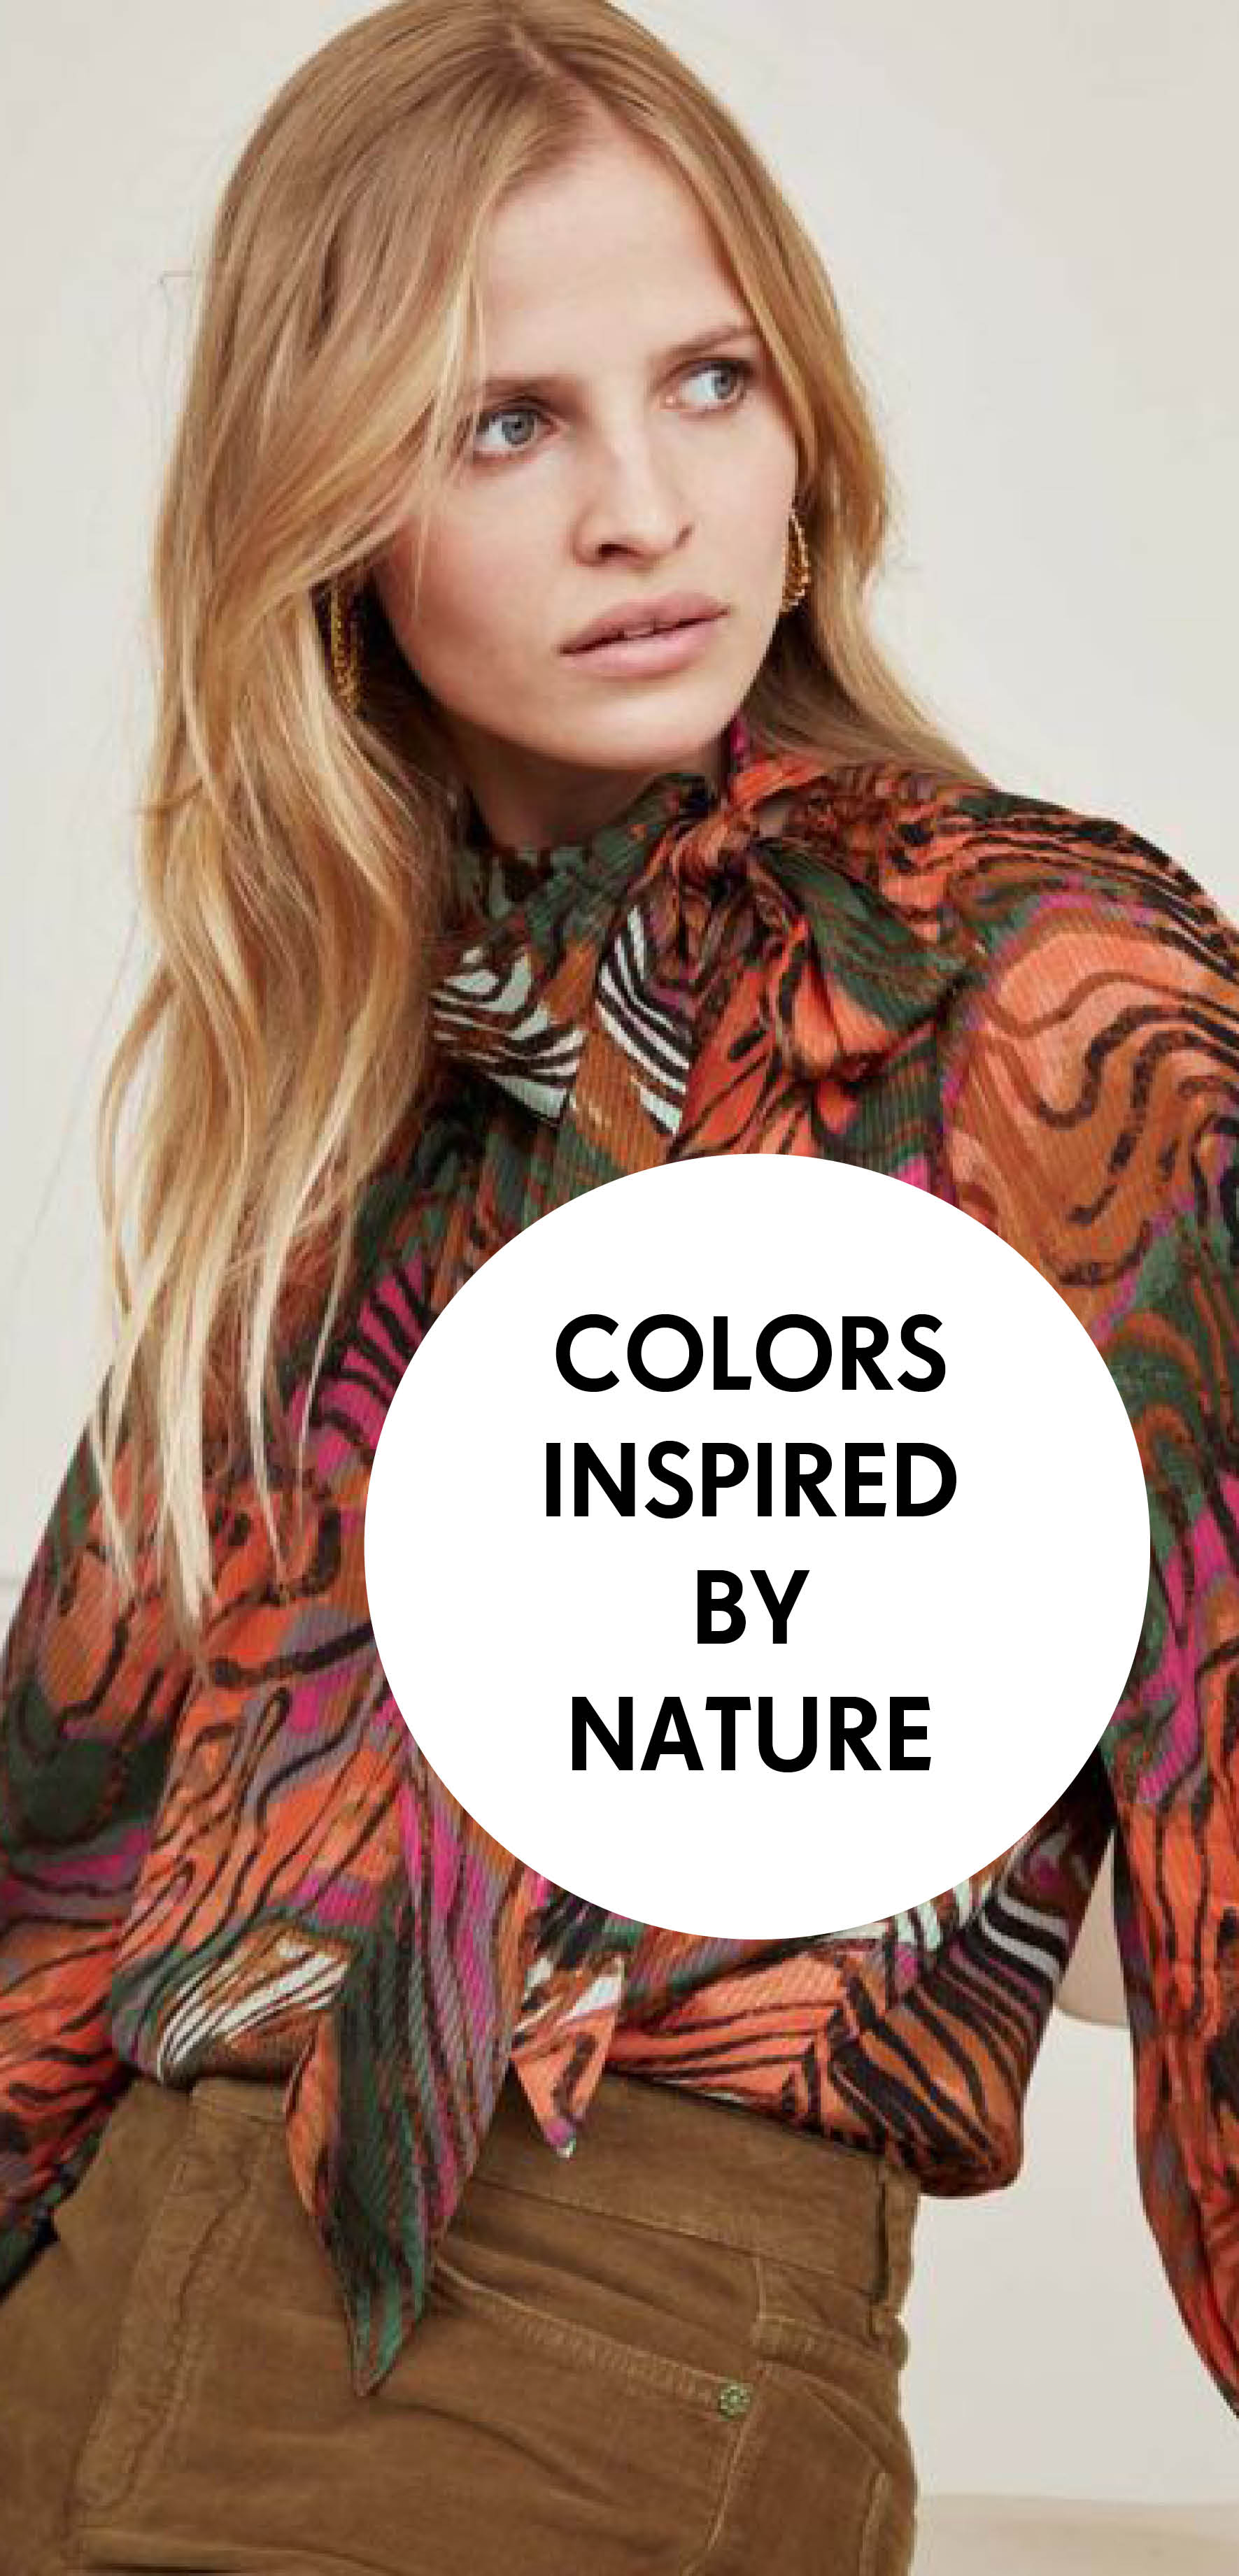 Colours inspired by nature